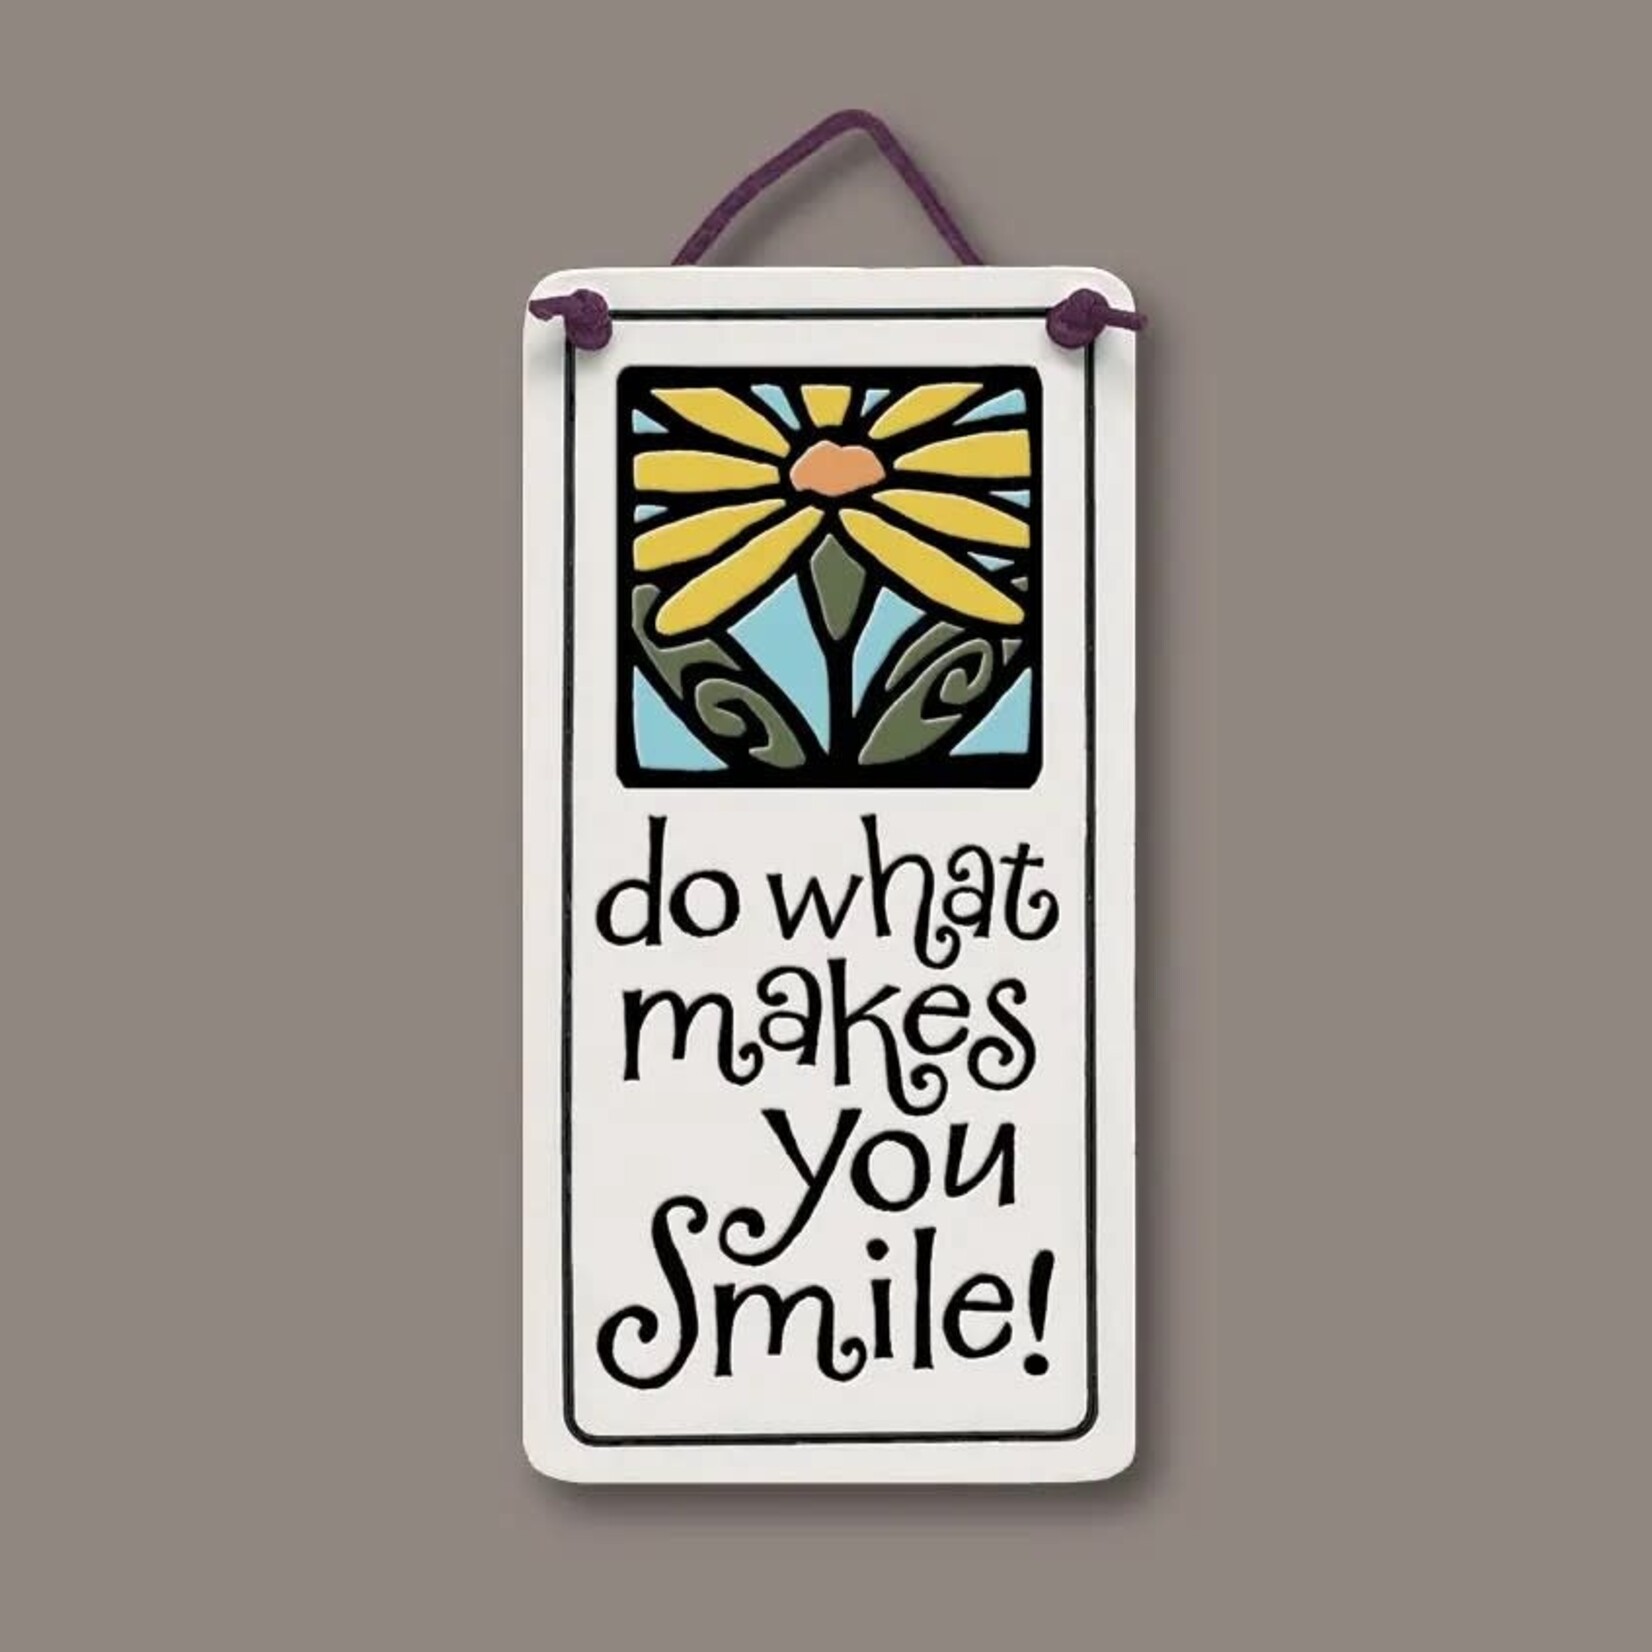 DO WHAT MAKES YOU SMILE - MINI HANGING TILE